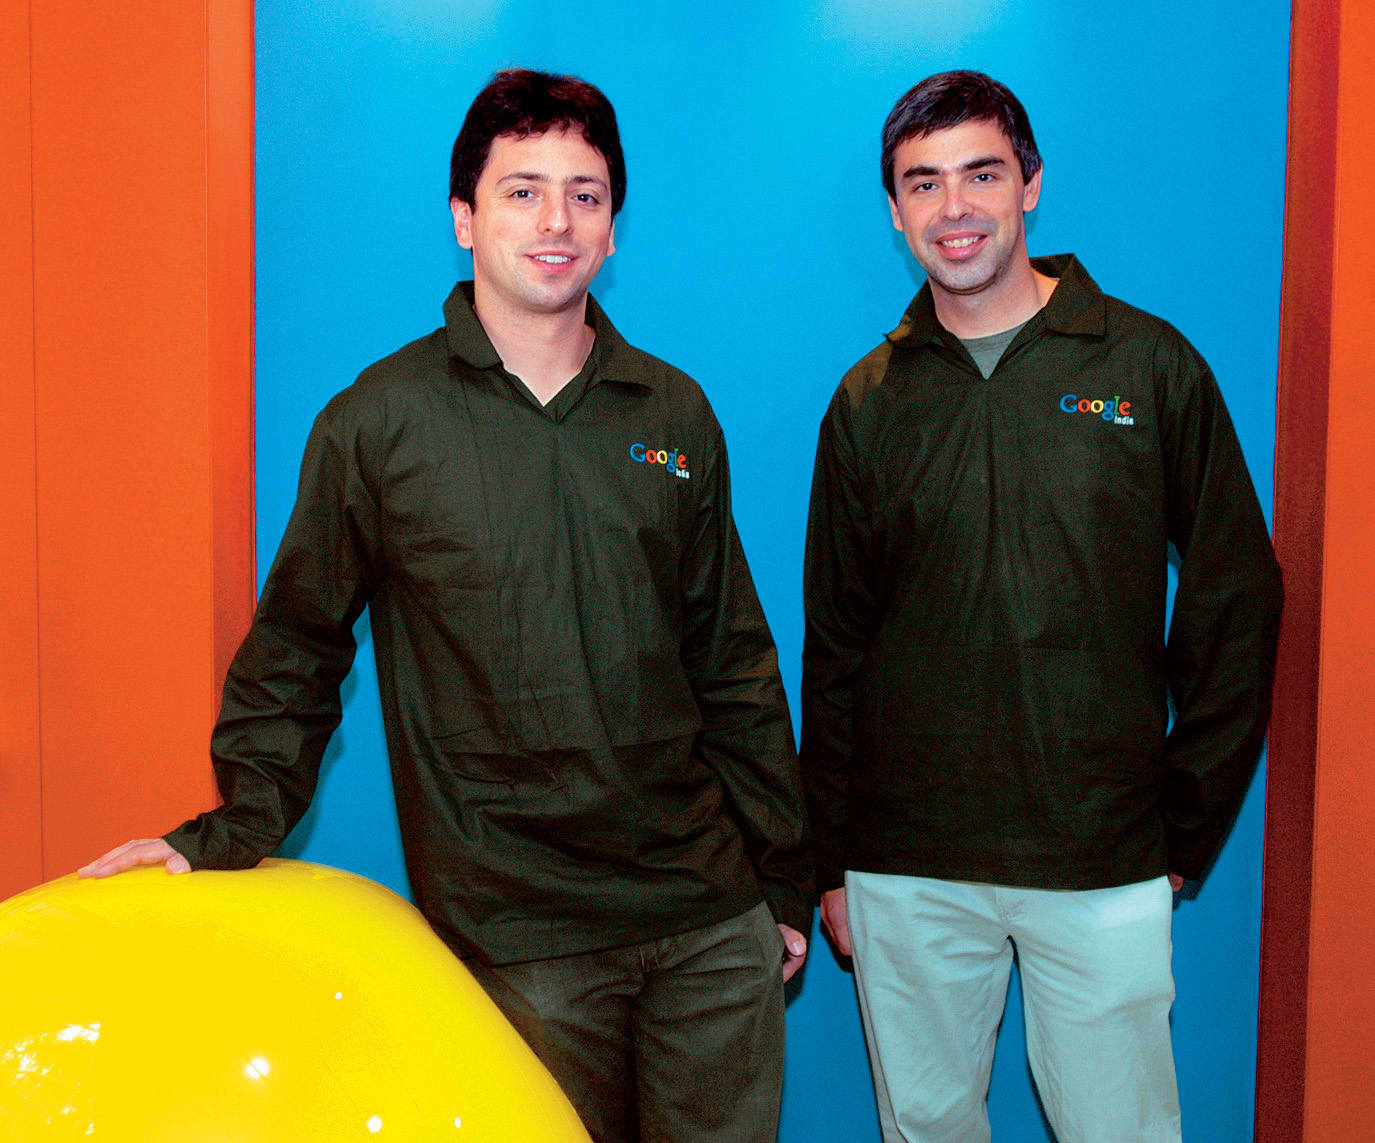 Larry Page And Sergey Brin